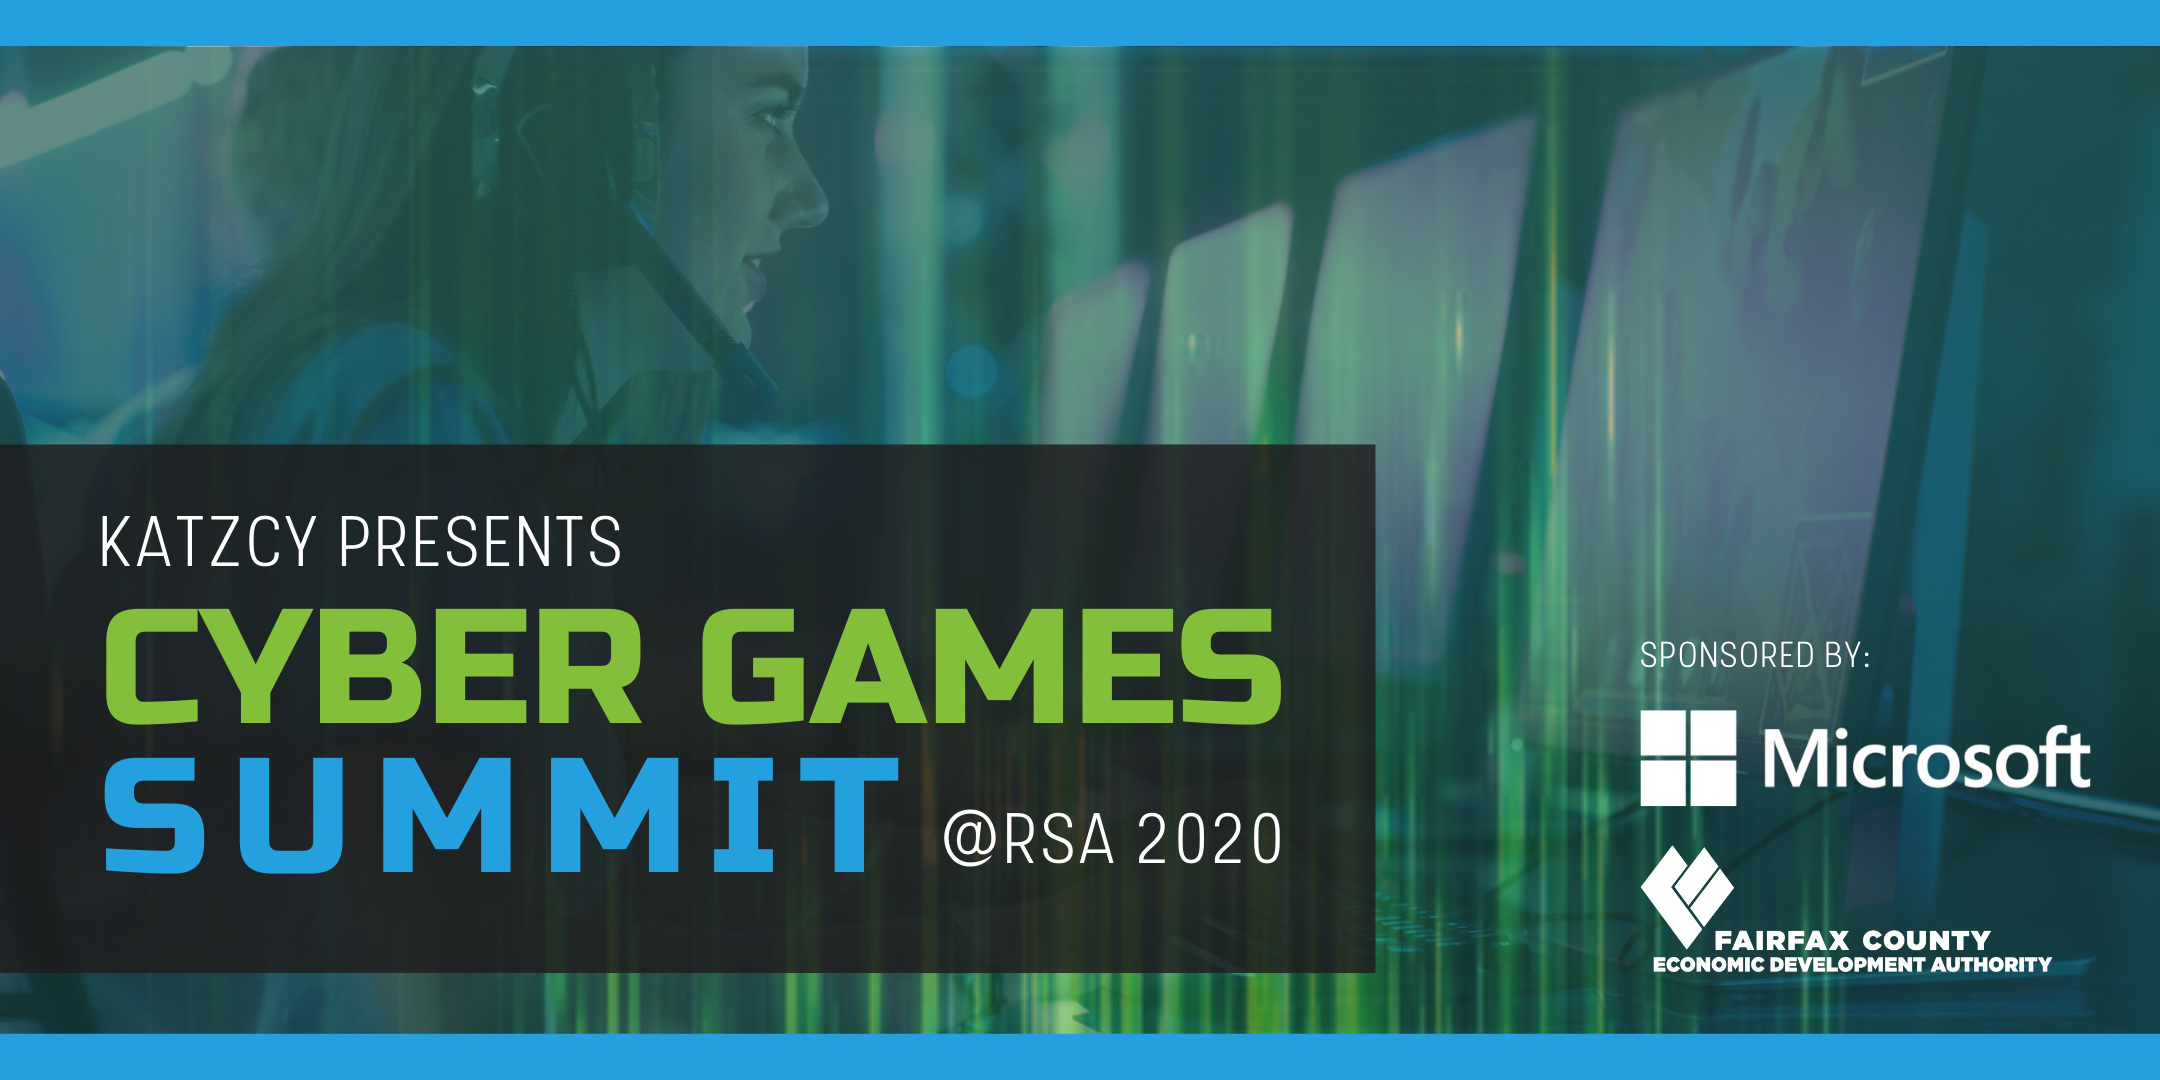 Cyber Games Summit @RSA Conference 2020